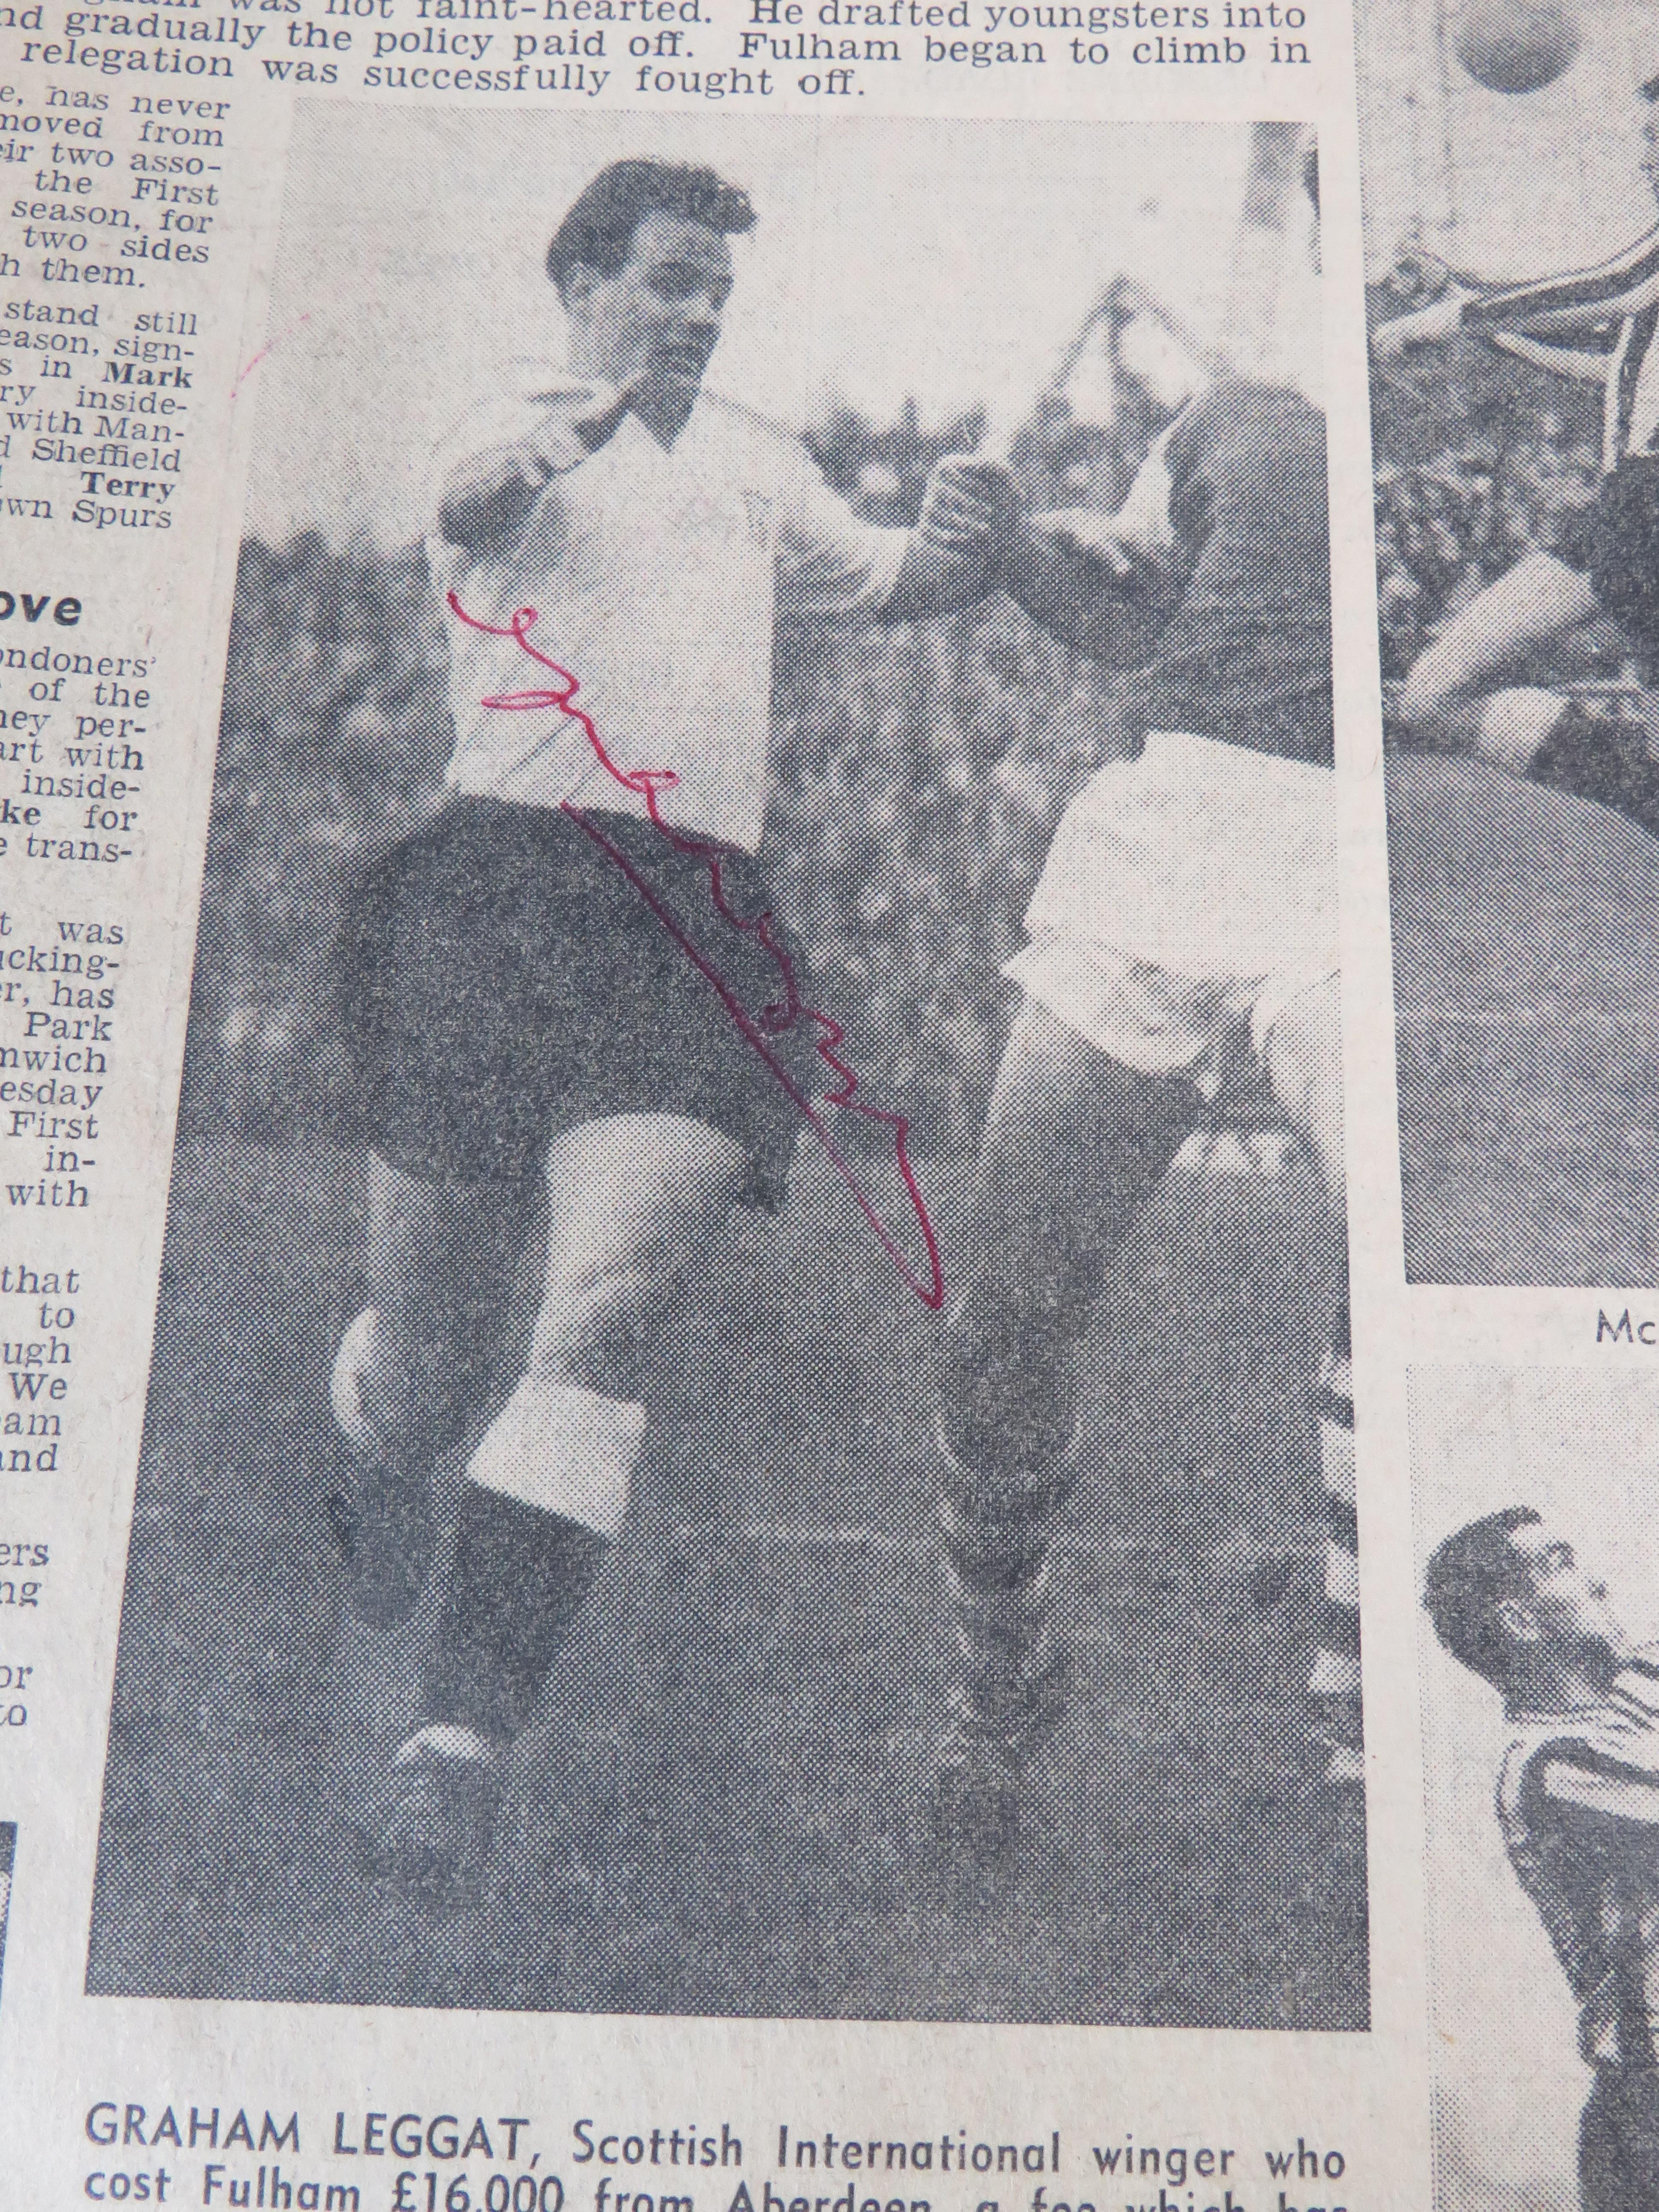 Sporting Magazines dating from 1950's, Newcastle United Match day programme from 1966 plus autograph - Image 9 of 11